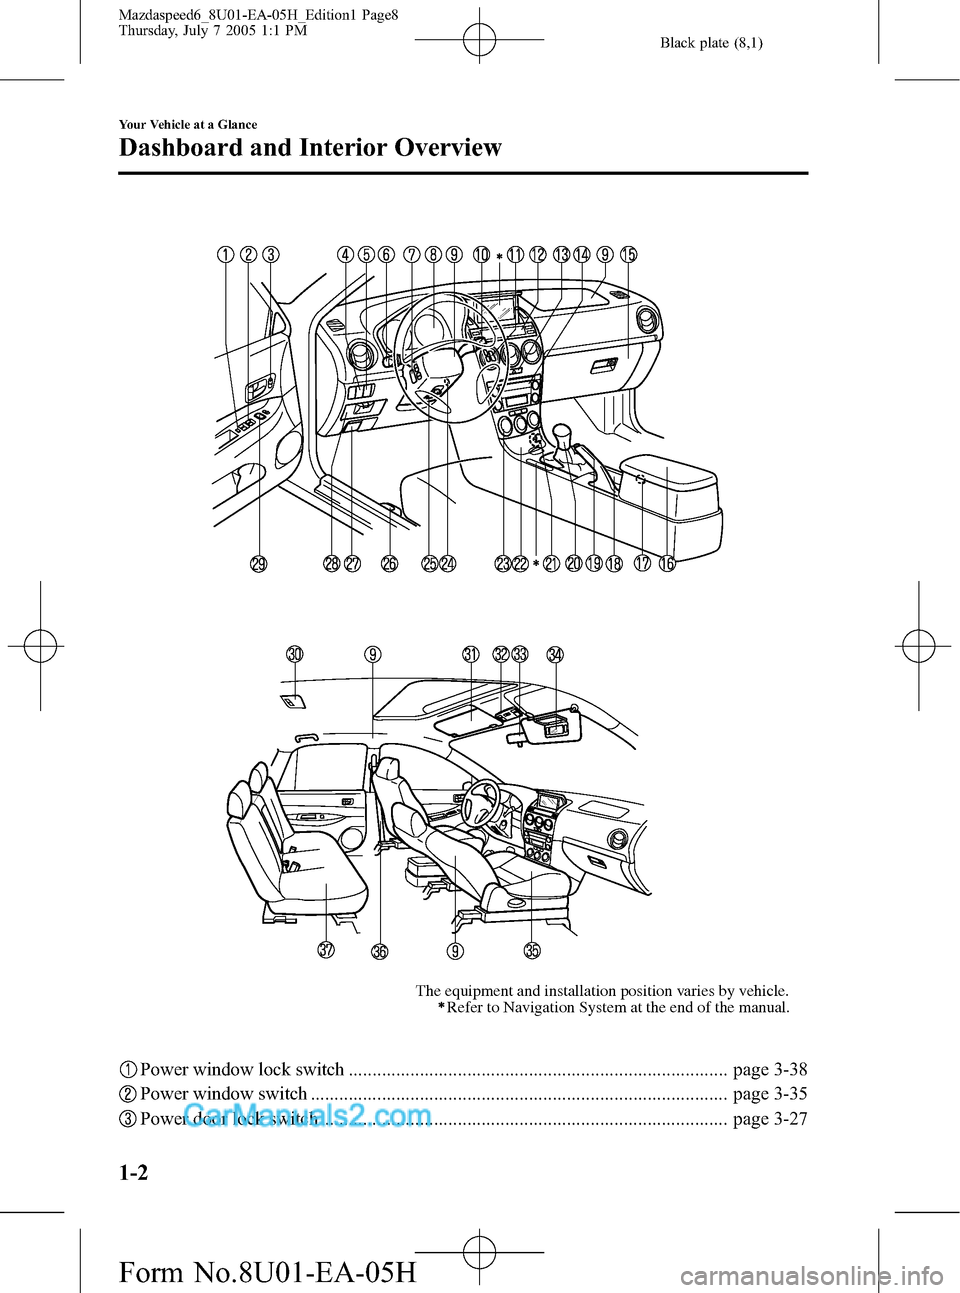 MAZDA MODEL MAZDASPEED 6 2006  Owners Manual (in English) Black plate (8,1)
The equipment and installation position varies by vehicle.
Refer to Navigation System at the end of the manual.
Power window lock switch .............................................